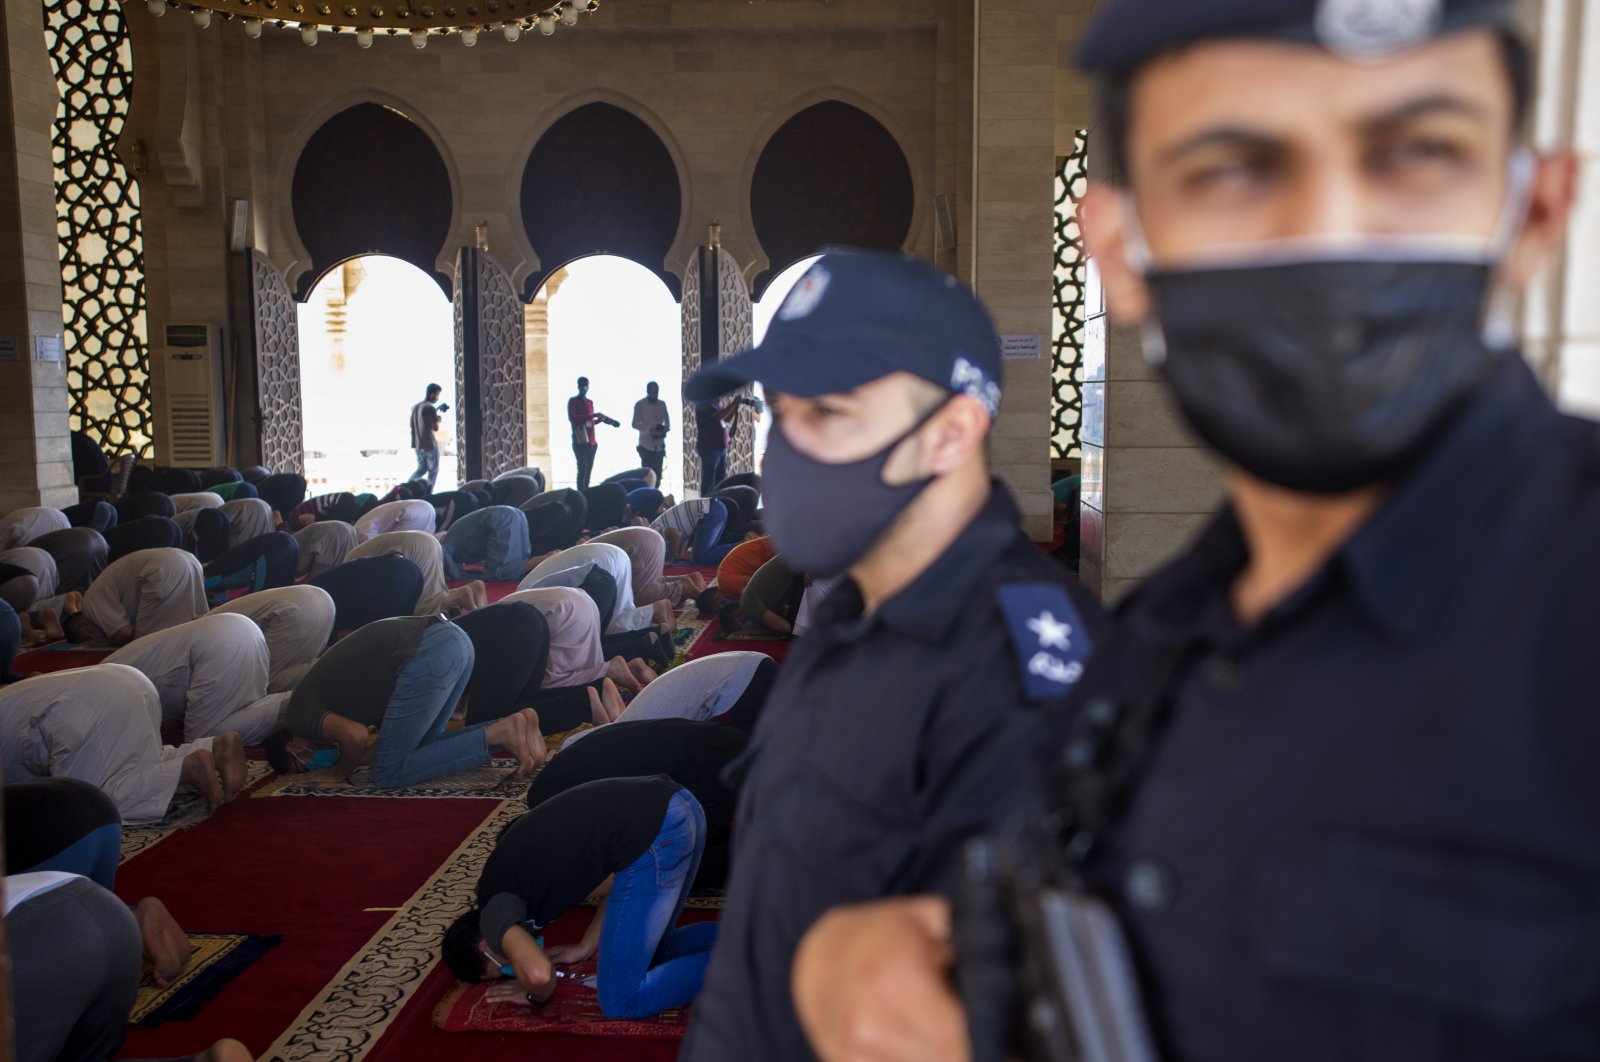 Palestinian Hamas police stand guard at the entrance of a mosque as worshipers attend the last Friday noon prayer of the holy month of Ramadan, Gaza City, Friday, May. 22, 2020. The blockaded territory confirmed its first COVID-19 death on Saturday.